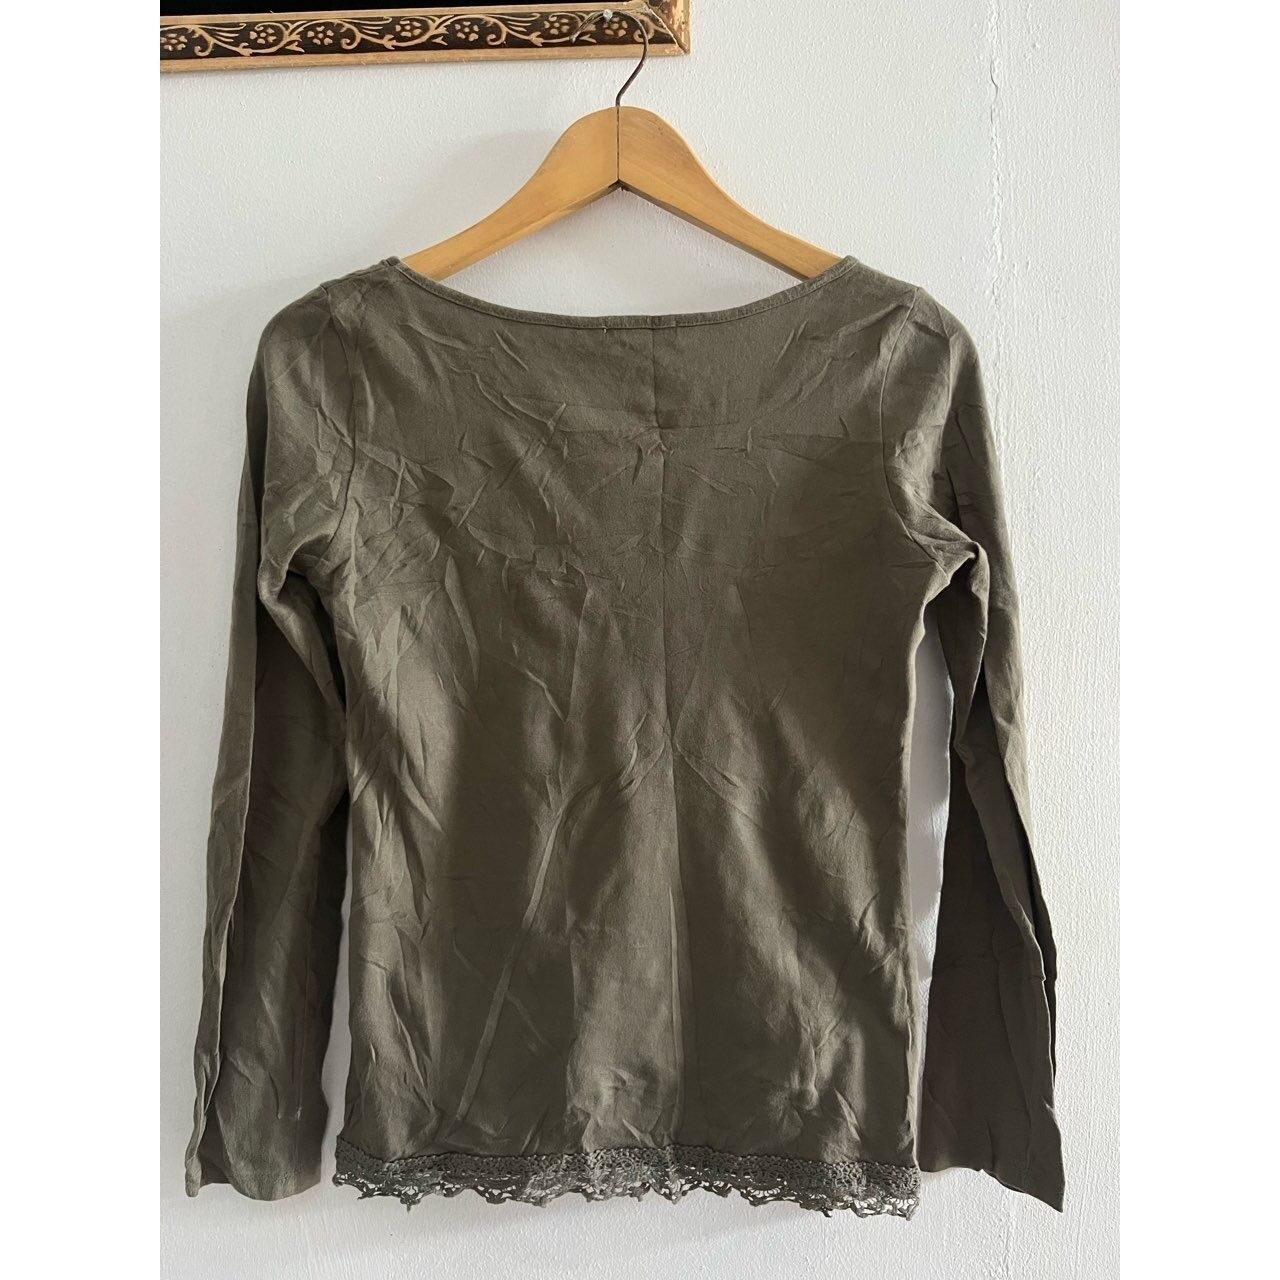 earth music & ecology Army Blouse